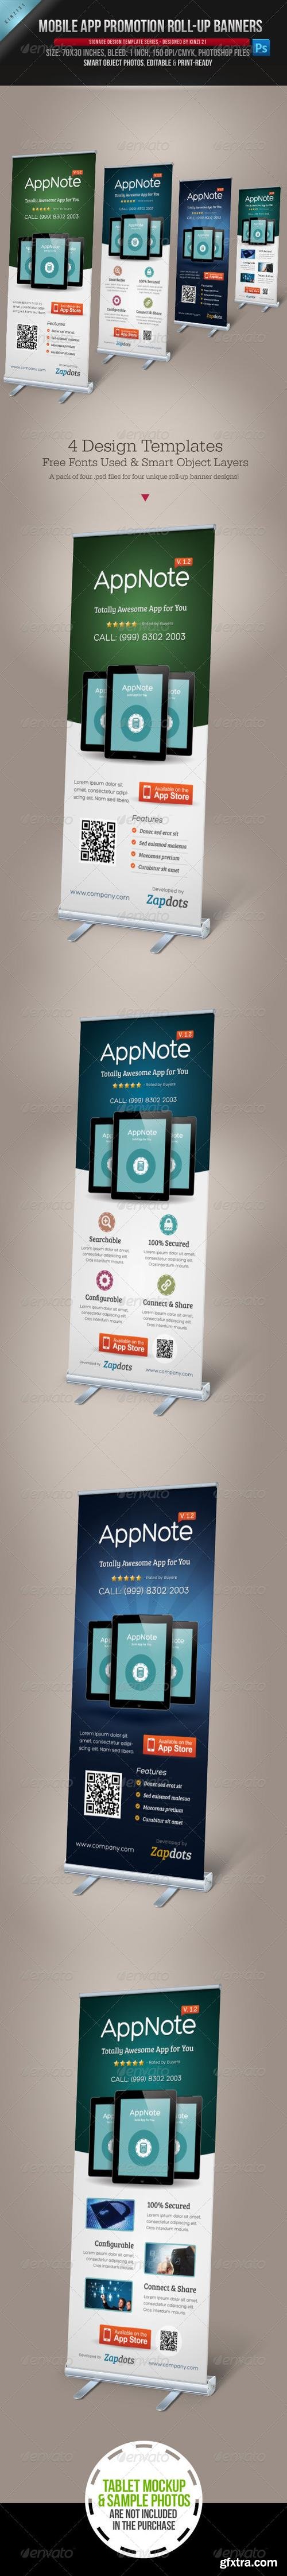 GraphicRiver - Mobile App Promotion Roll-up Banners - 4042603